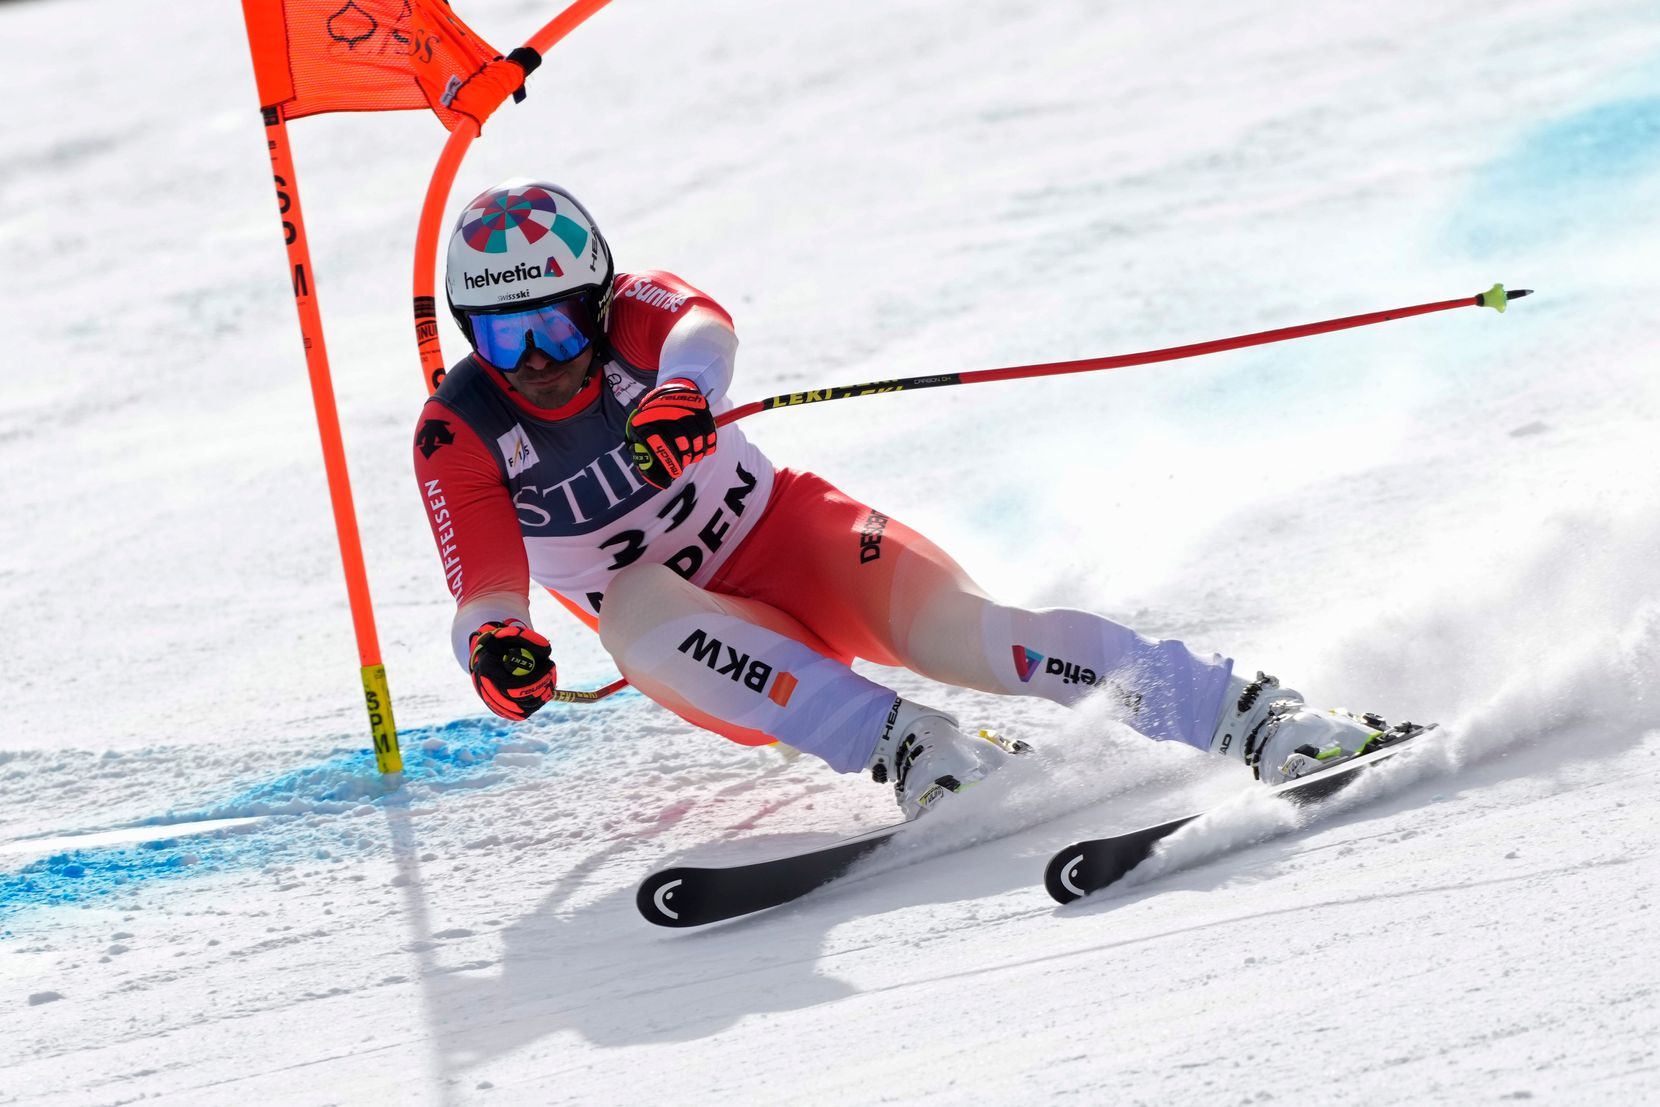 Switzerland's Gilles Roulin competes during a men's World Cup super-G skiing race Sunday, March 5, 2023, in Aspen, Colo. (AP Photo/Robert F. Bukaty)